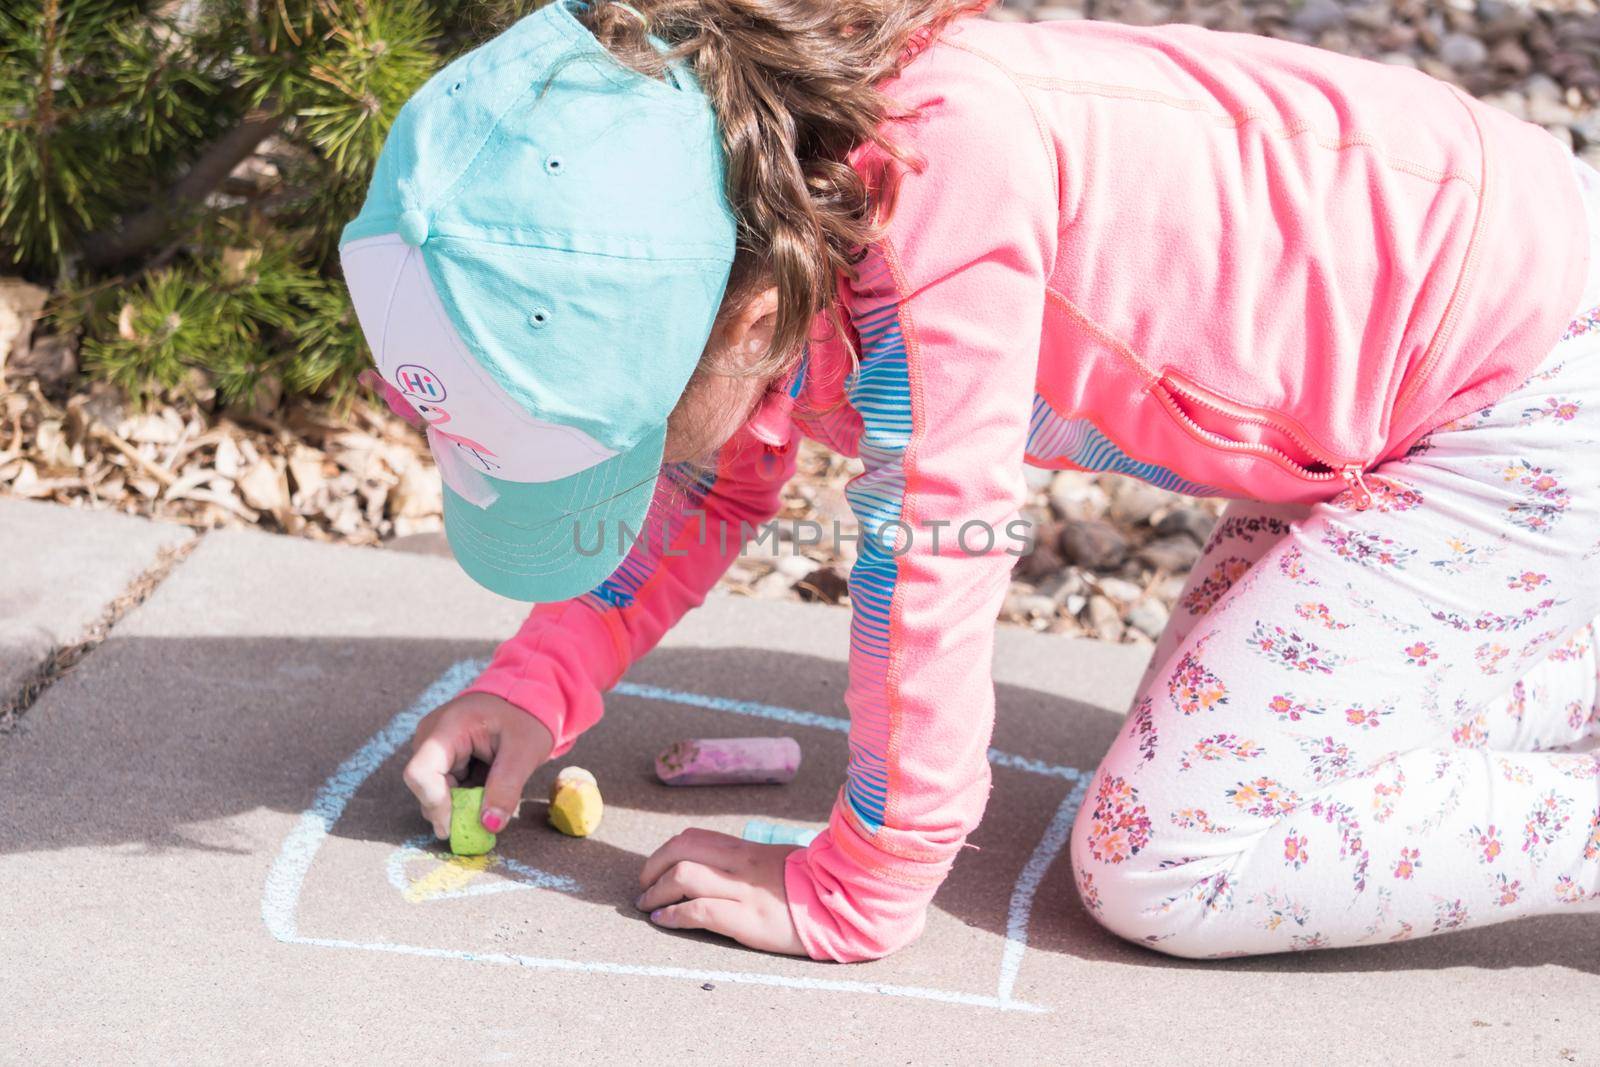 Little girl playing with chalk on a driveway in front of the house.